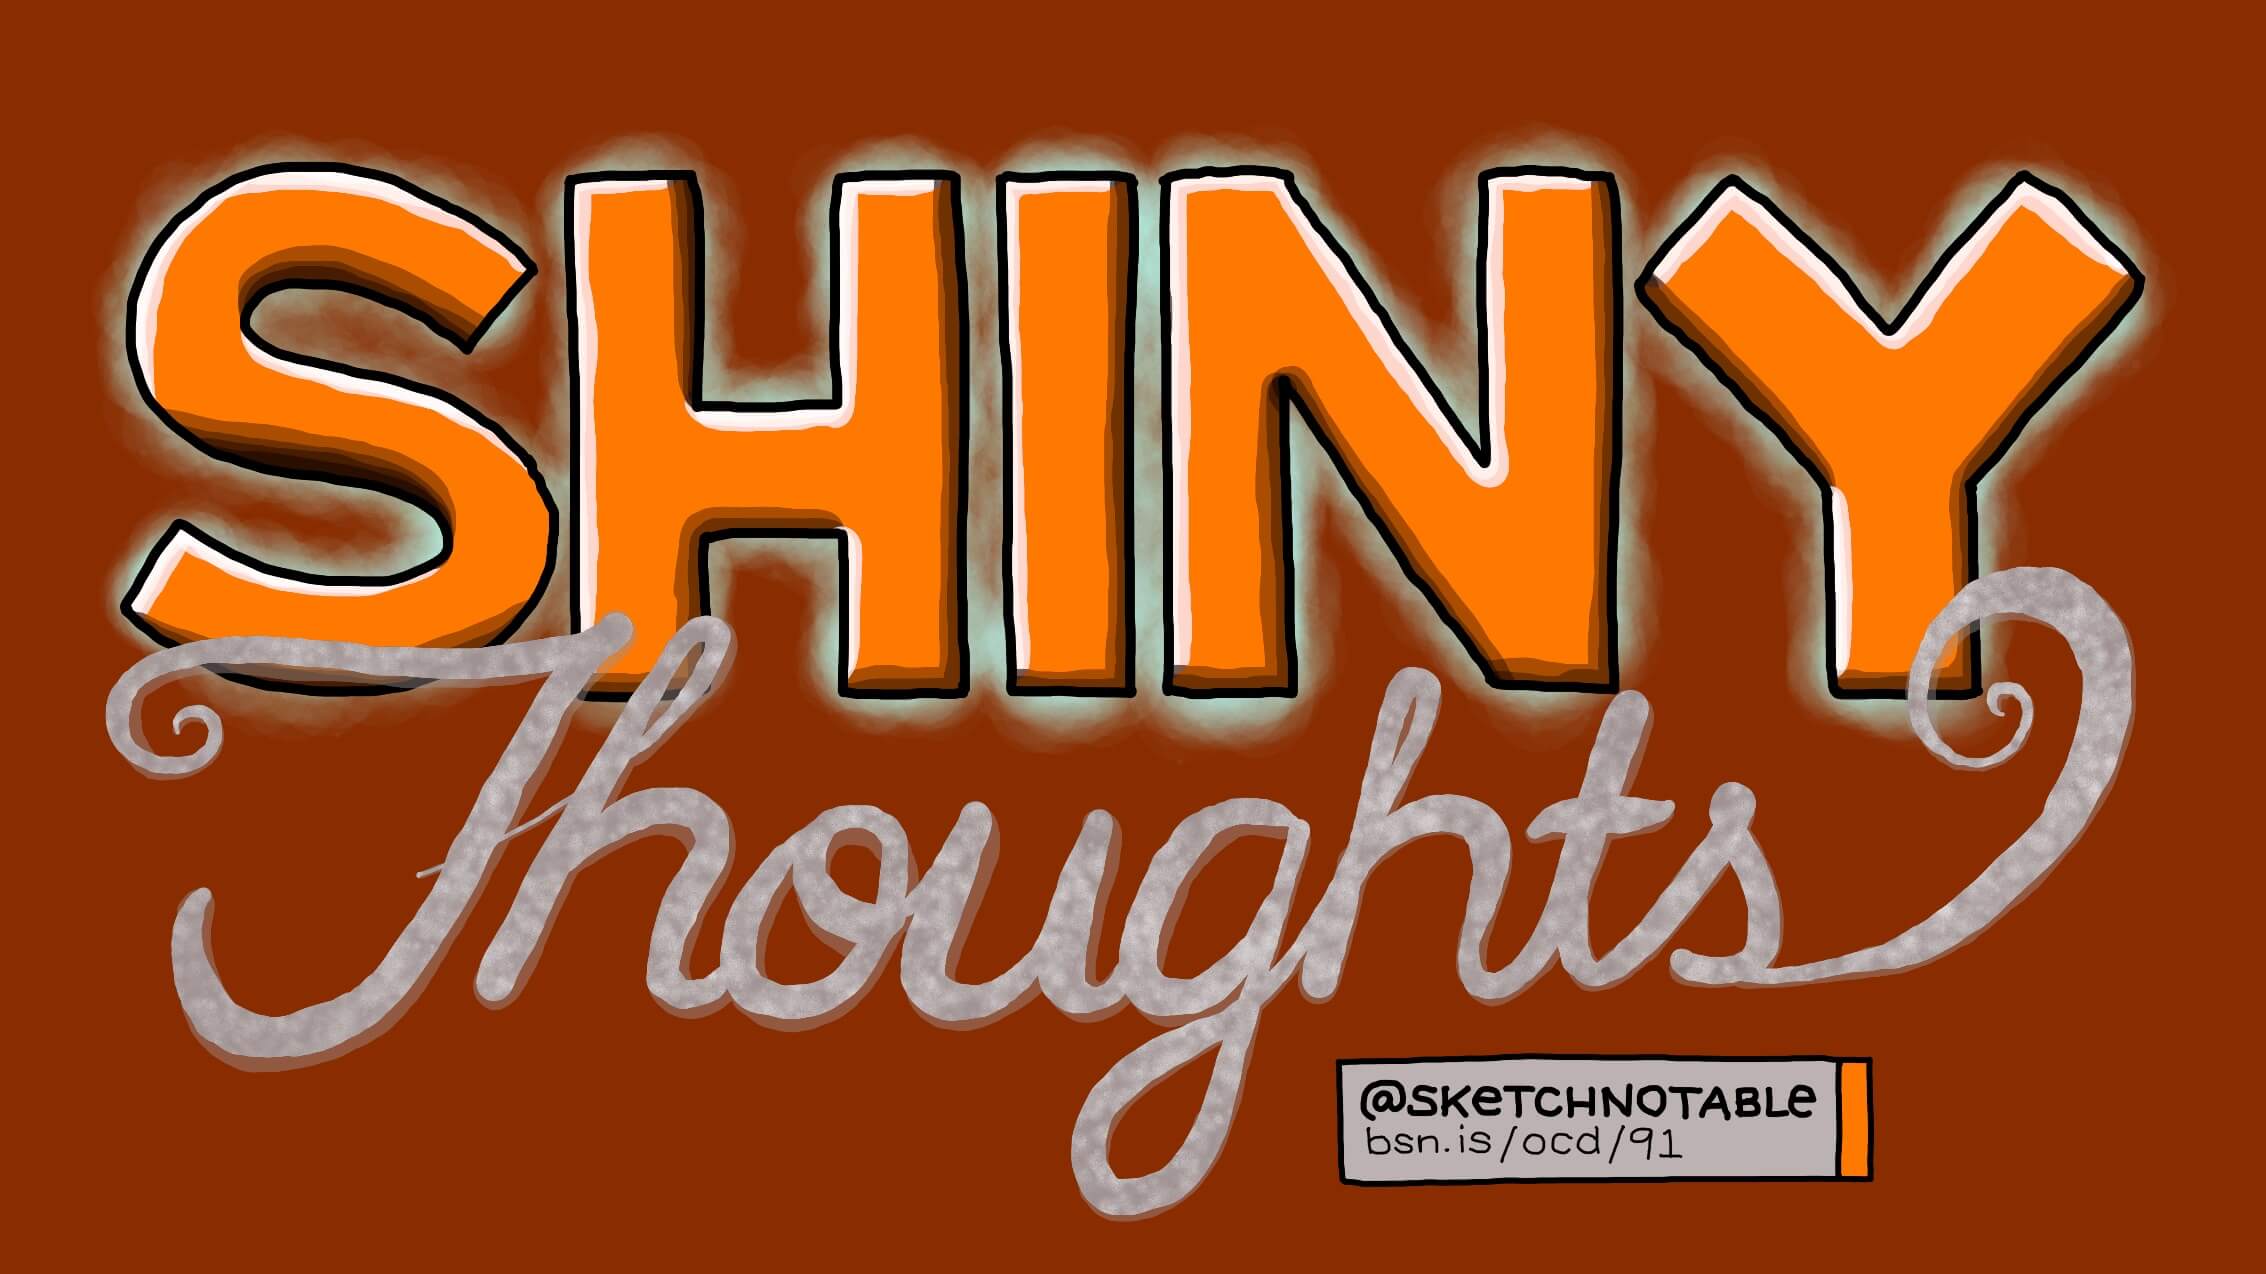 Shiny thoughts